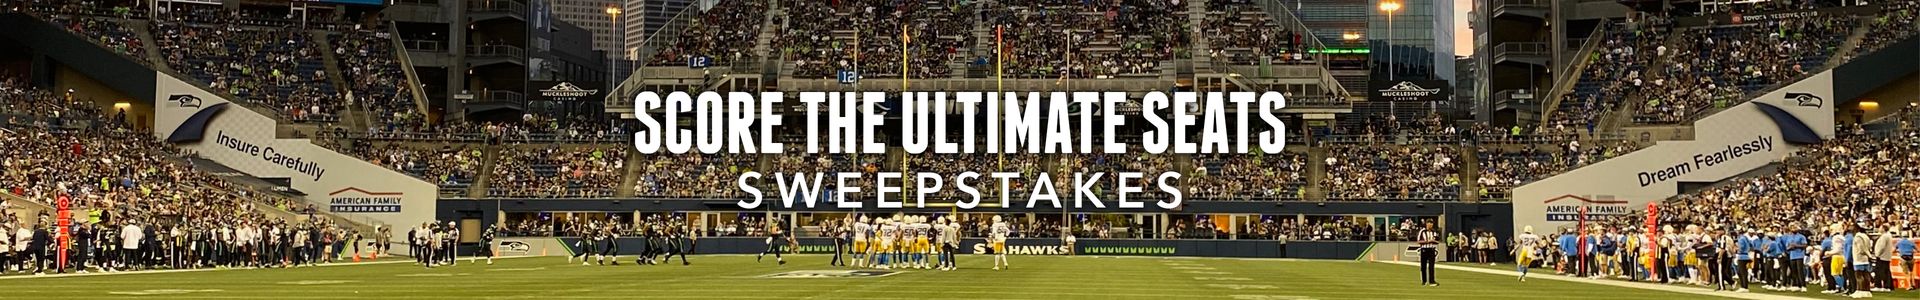 SCORE the Ultimate Seats Sweepstakes